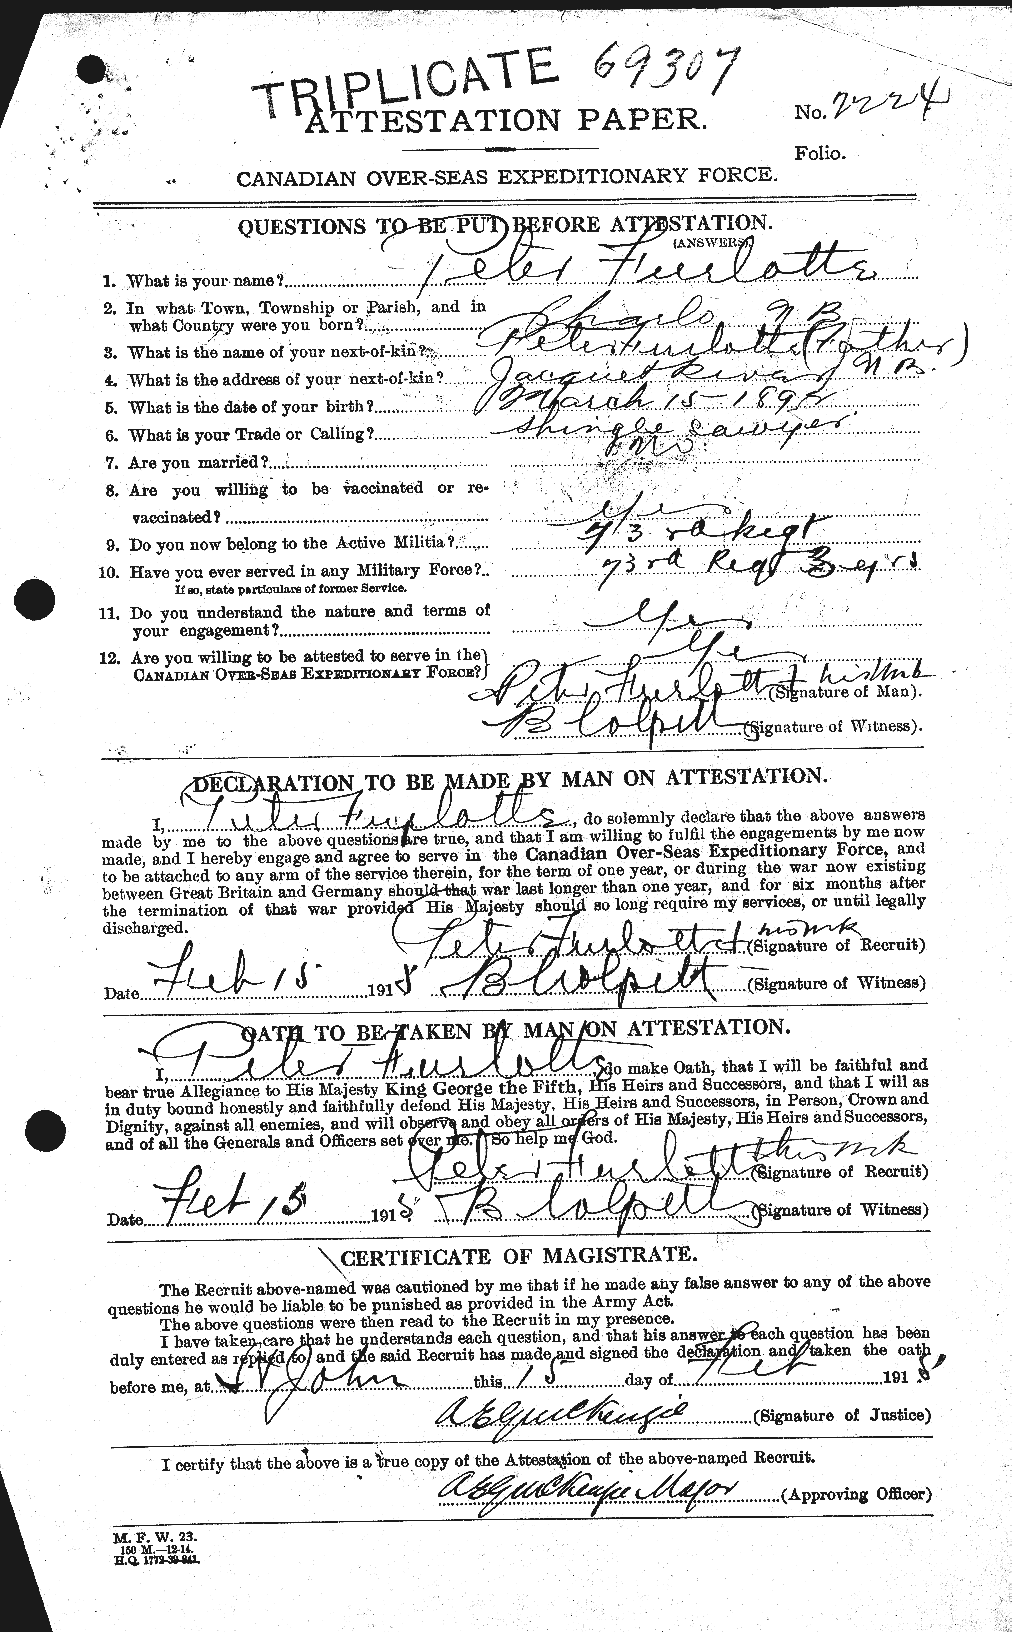 Personnel Records of the First World War - CEF 335439a